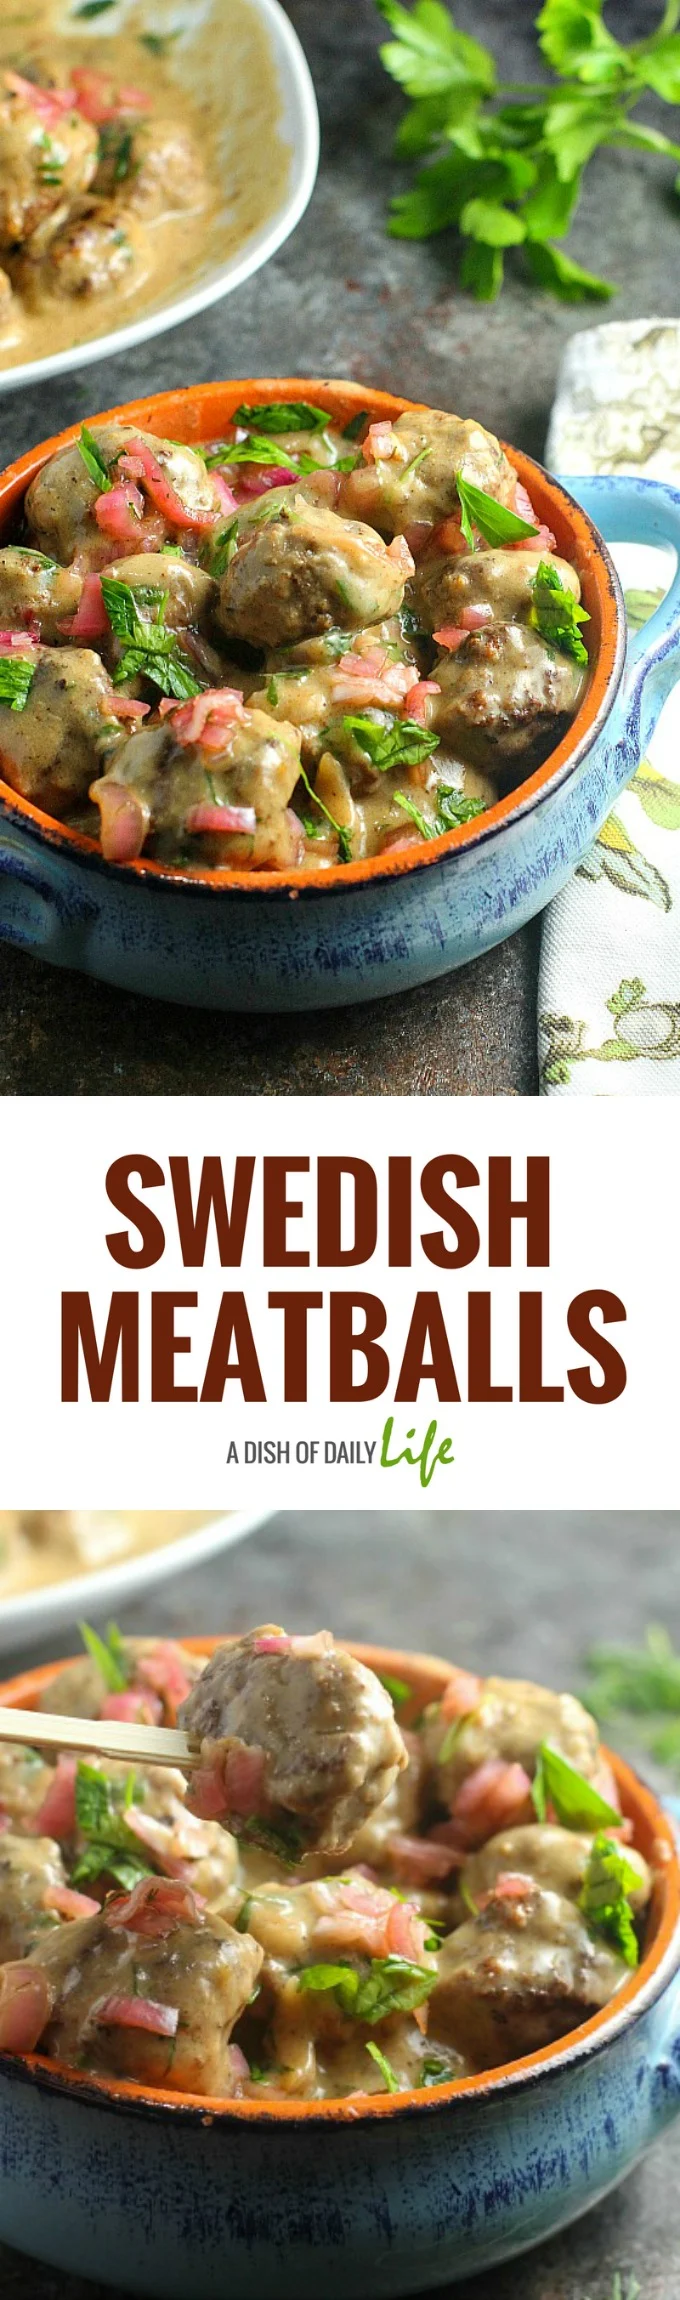 Swedish Meatballs, topped with pickled shallots, are the perfect starter to this elegant dinner party menu! #appetizer #meatballs #SwedishMeatballs